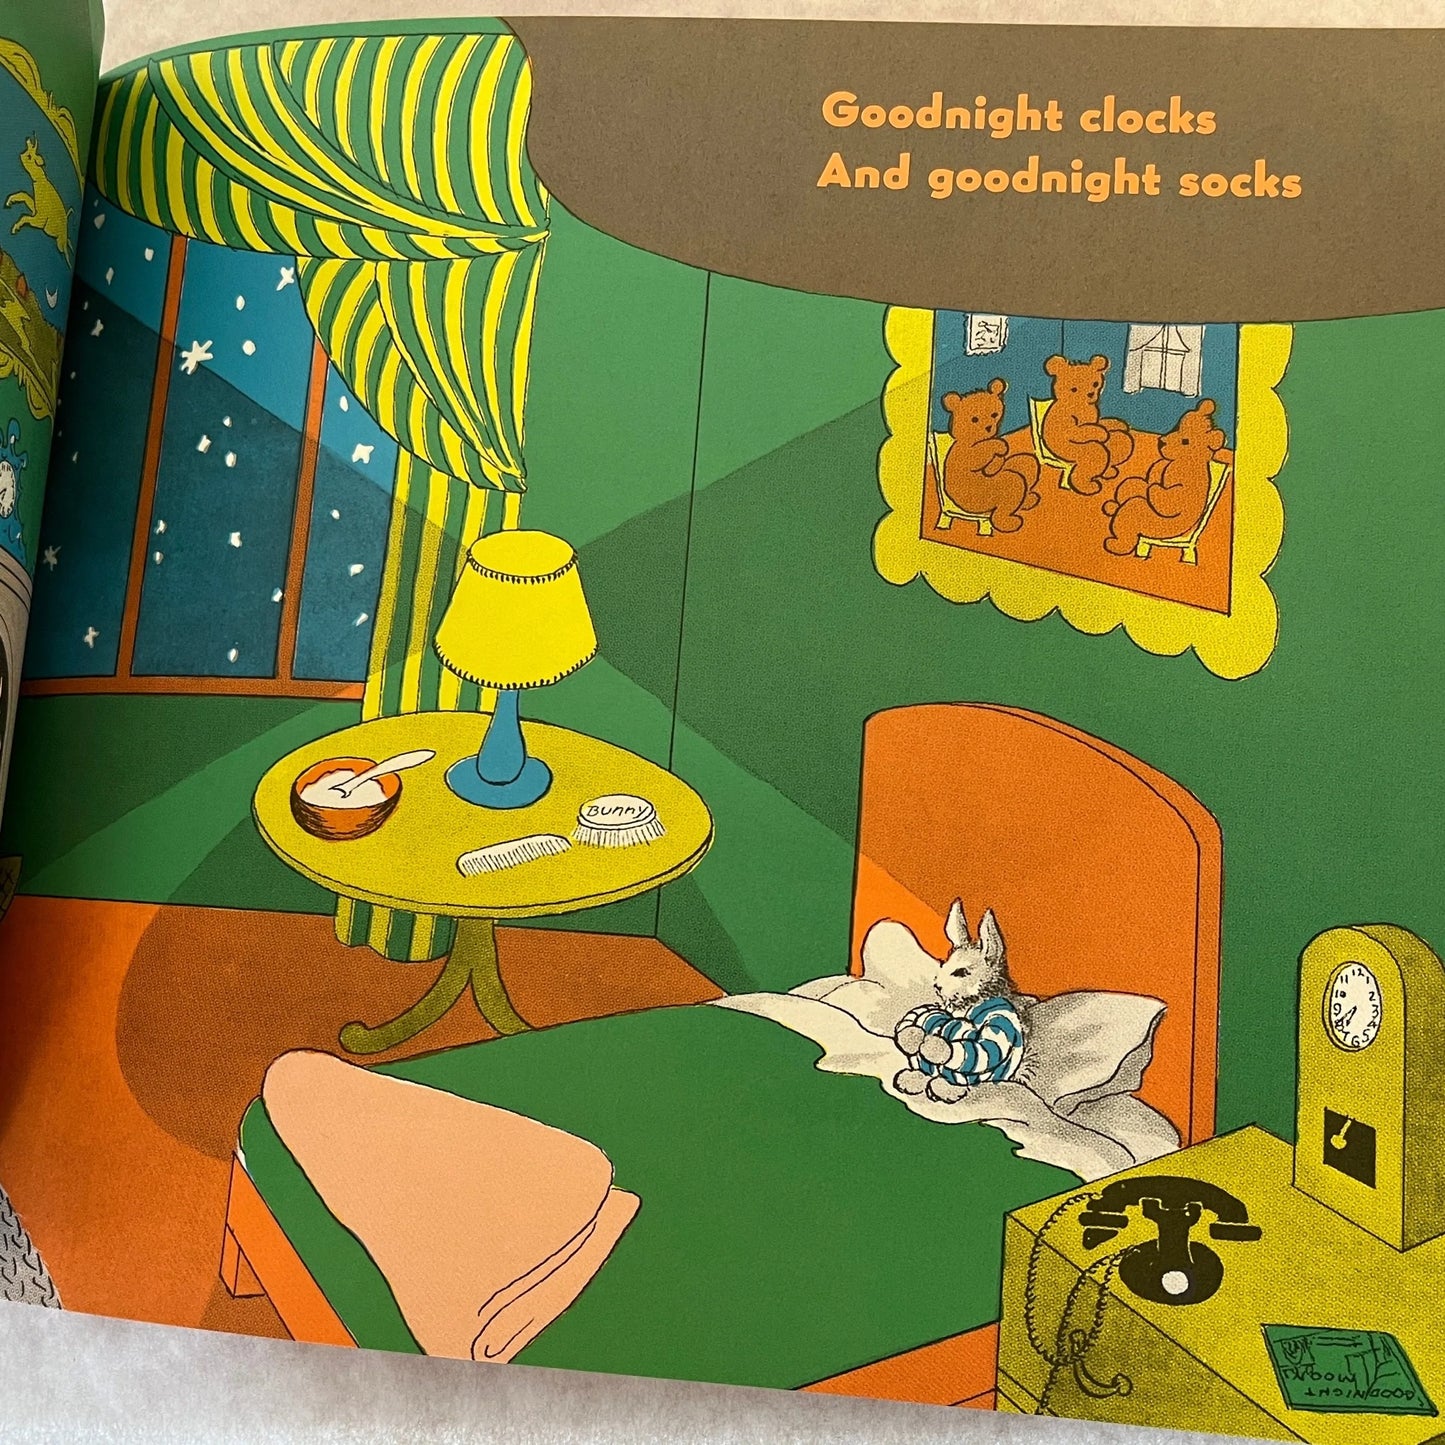 Book & Bunny: Goodnight Moon softcover book plus soft plush white rabbit